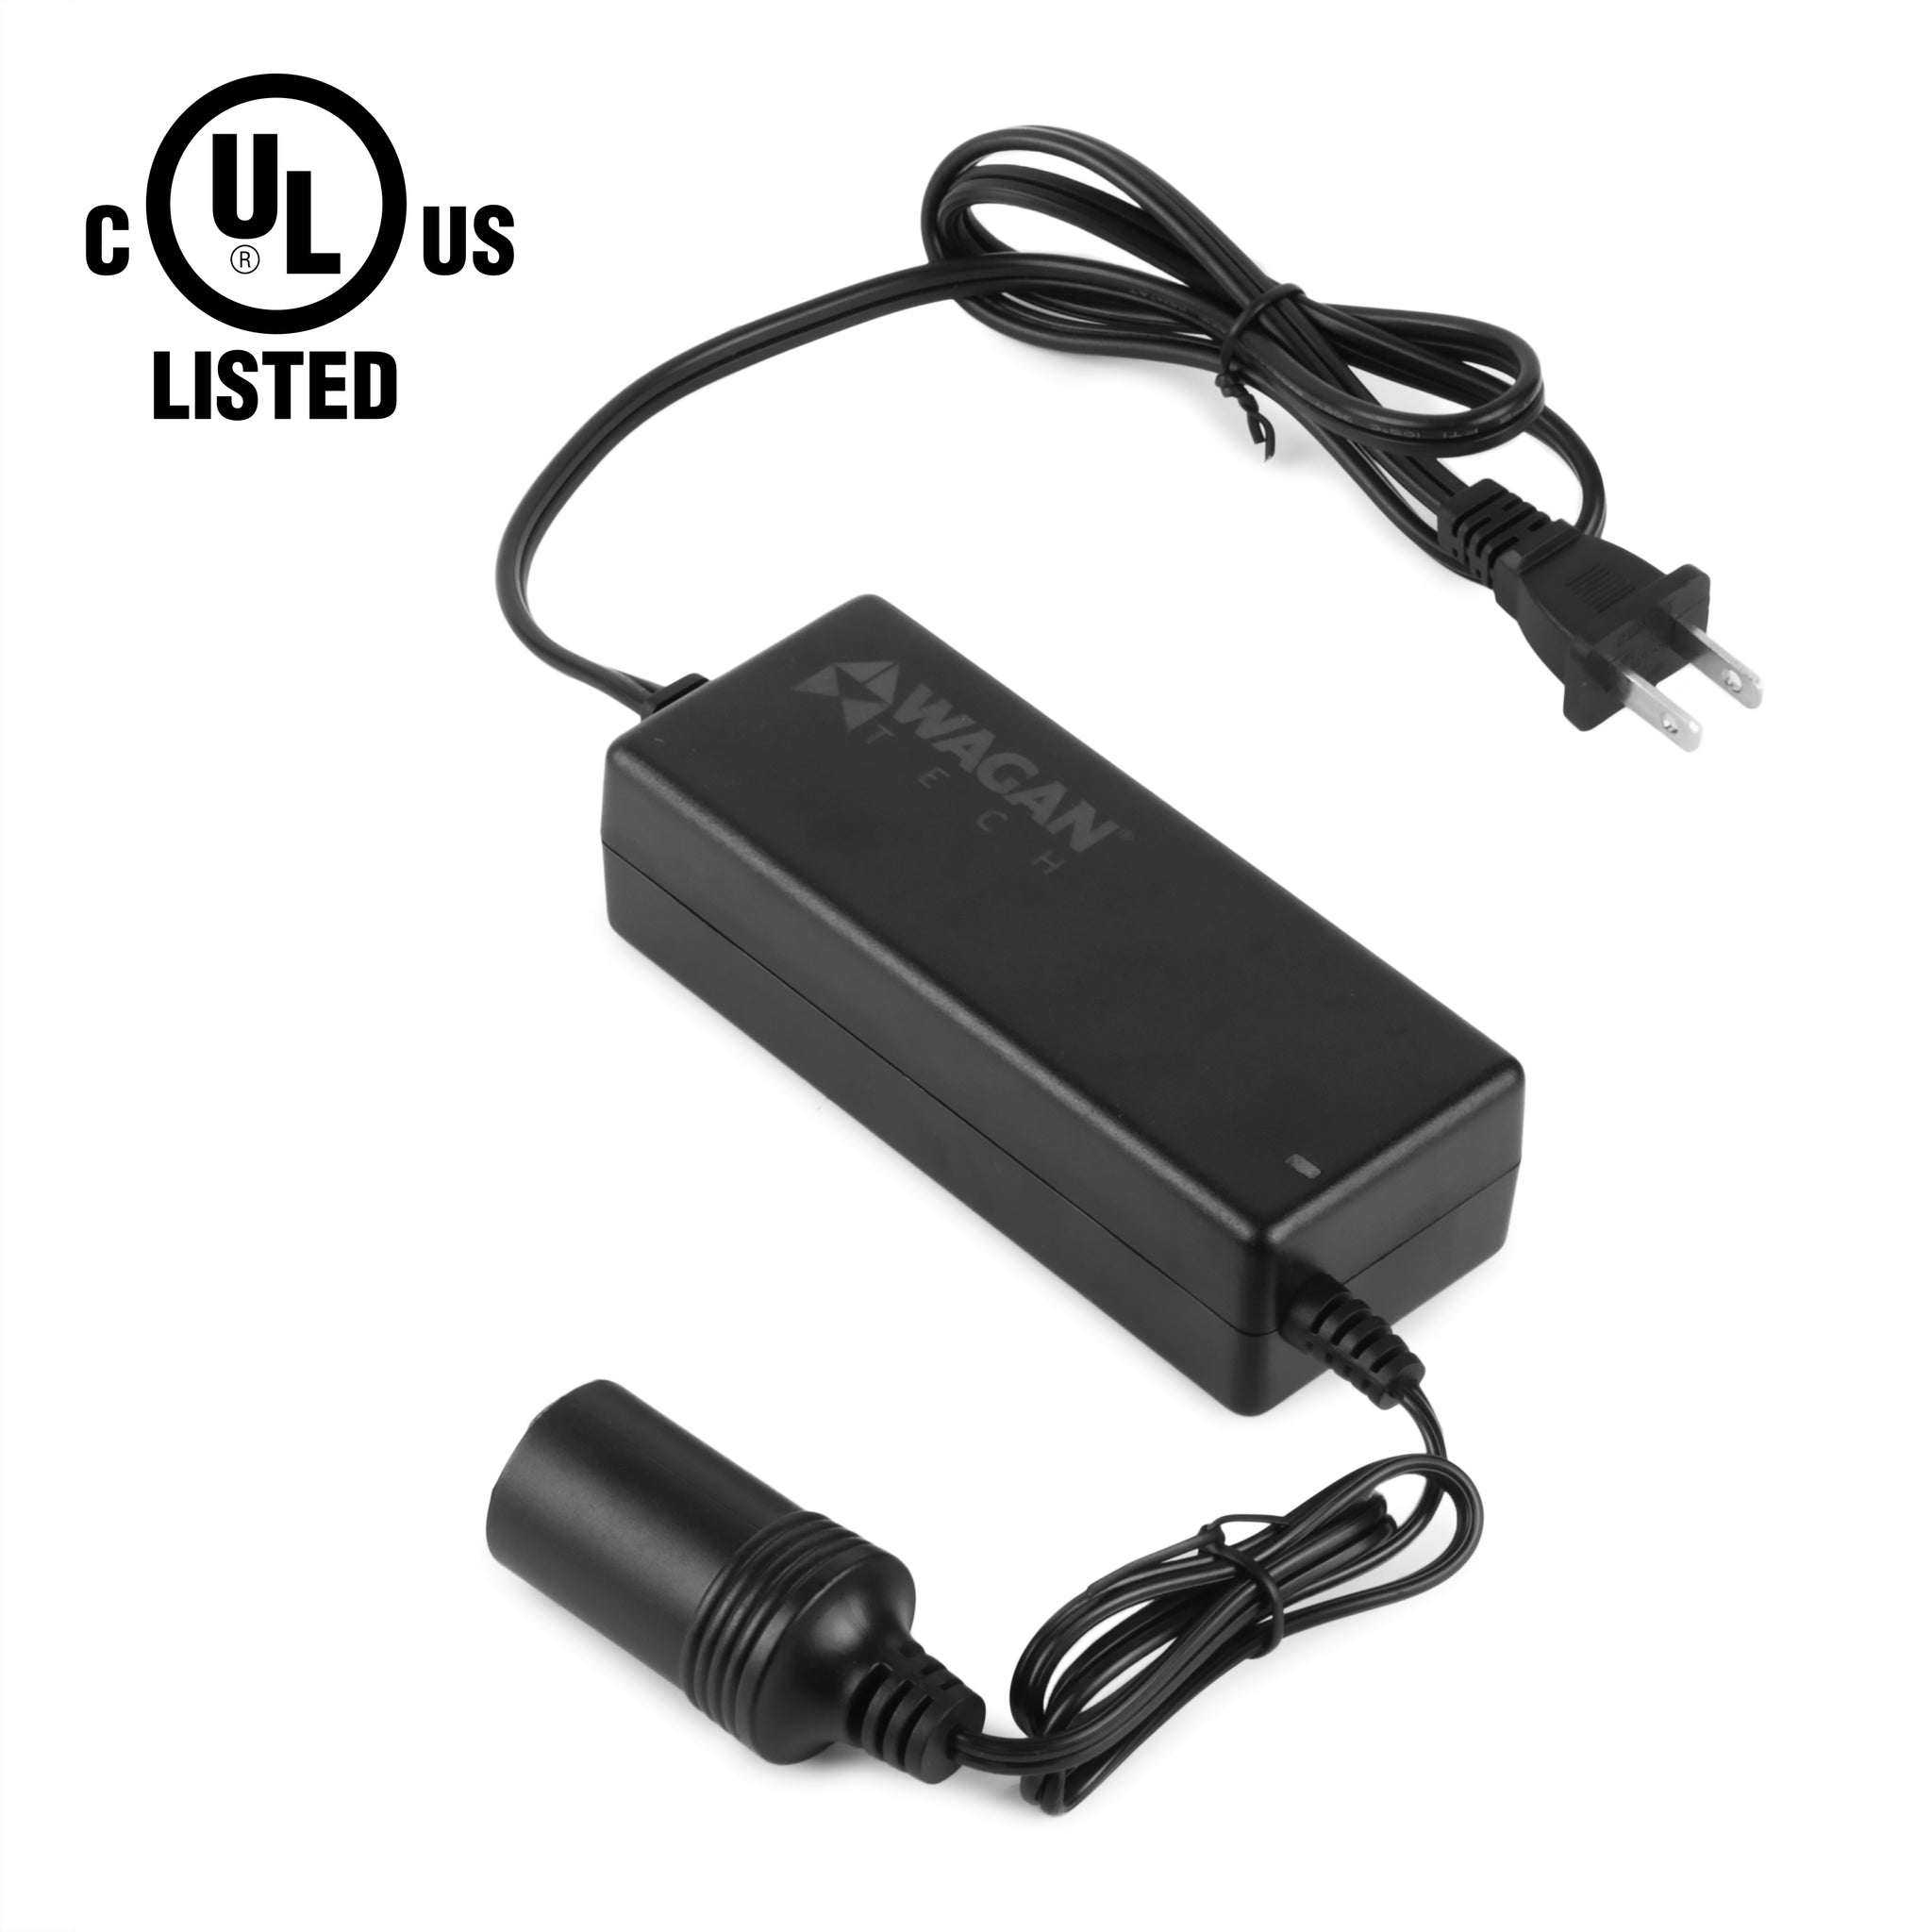 UpBright 5V AC/DC Adapter Compatible with Innov IVP0500-0300 IVP05000300 My  Weigh Ultraship Scale MyWeigh KD DX R1 R1-40 R1-60 R1-80 R140 R160 R180 5V